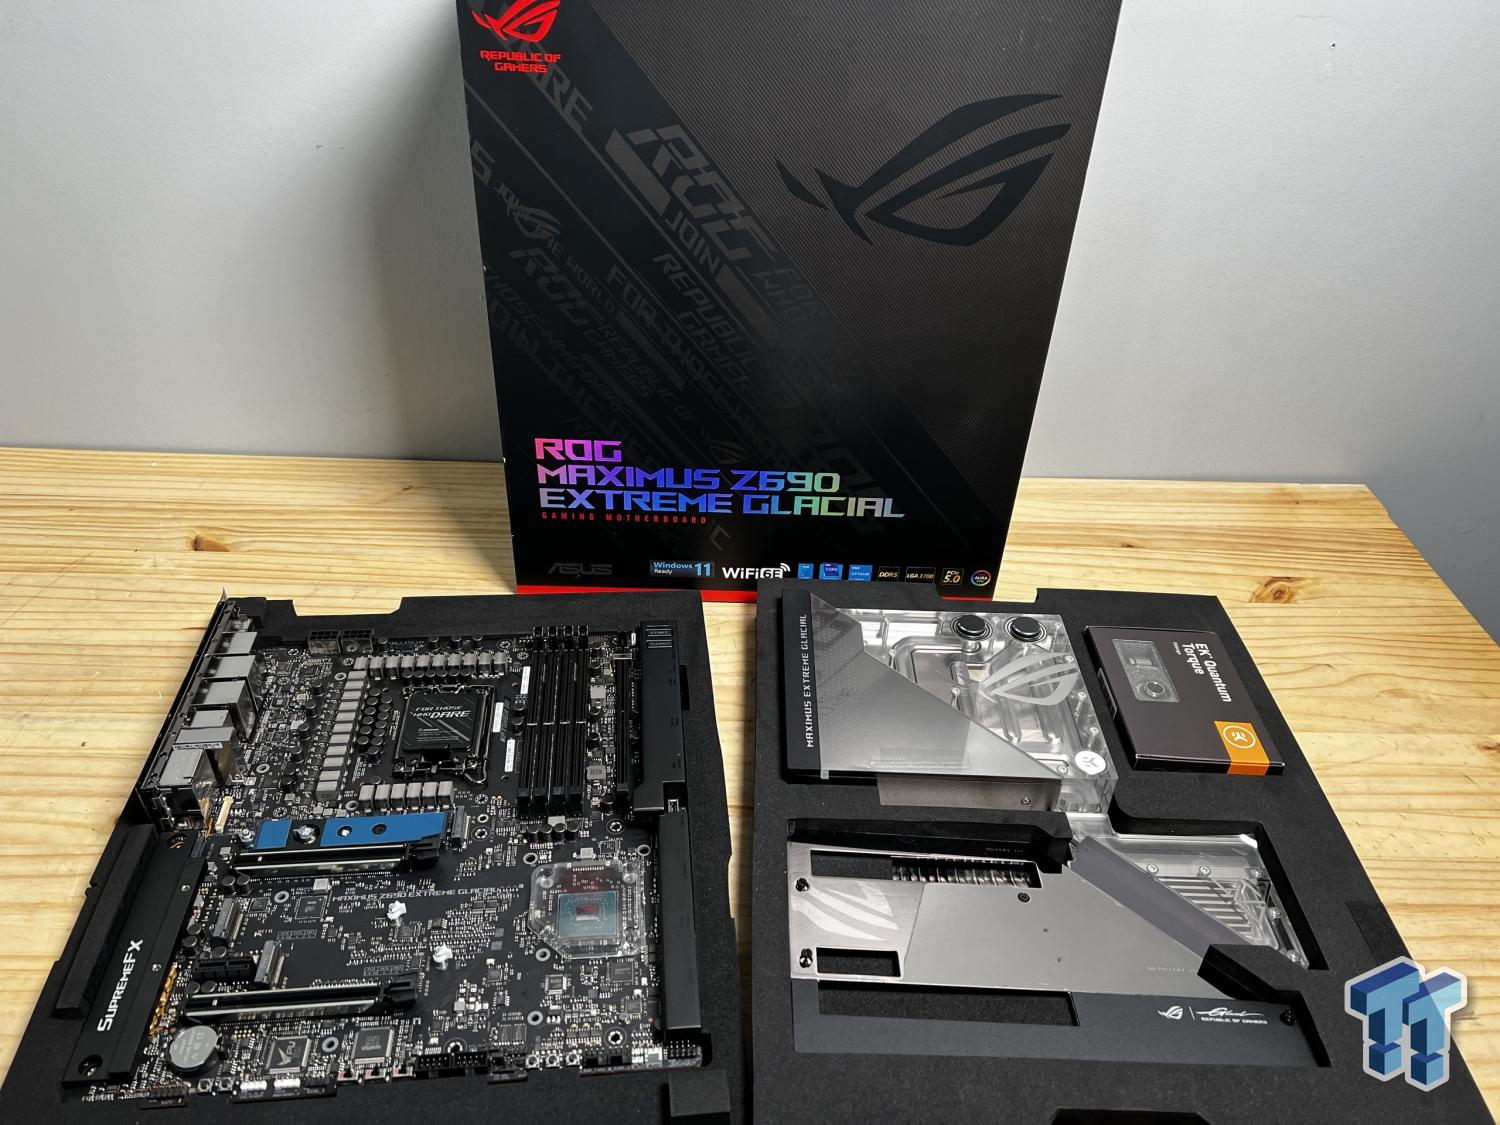 ASUS ROG Z690 Maximus Extreme Glacial Motherboard Review